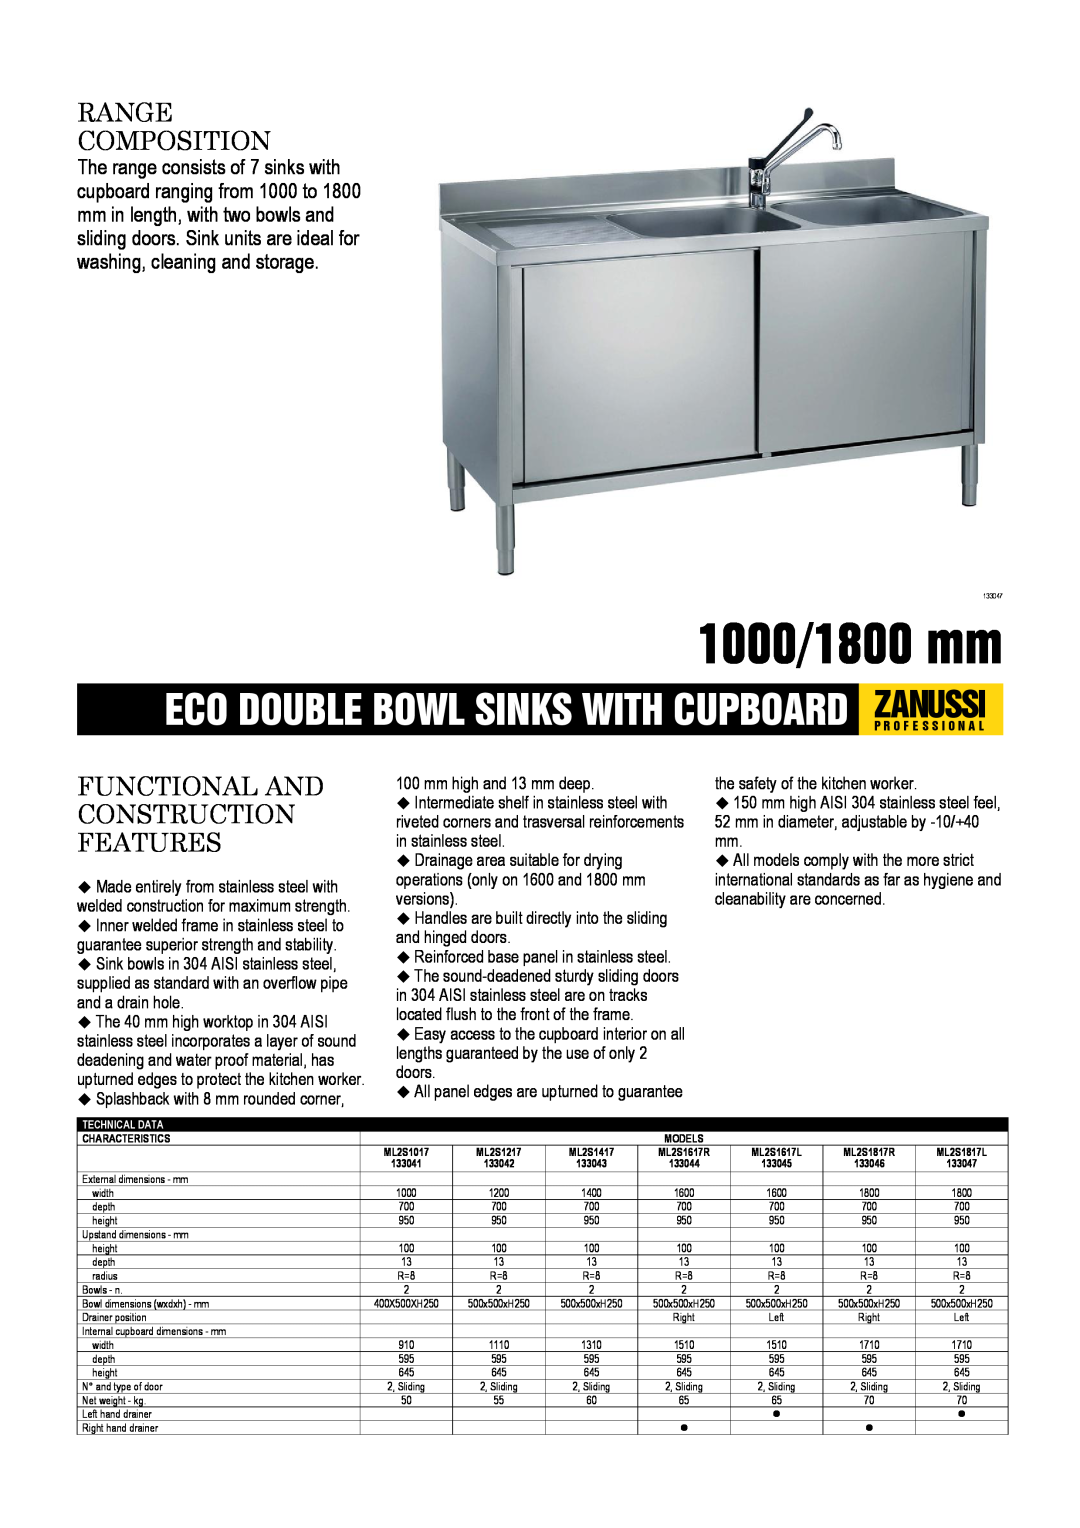 Zanussi ML2S1017, ML2S1617R, ML2S1617L dimensions 1000/1800 mm, Range Composition, Functional And Construction Features 